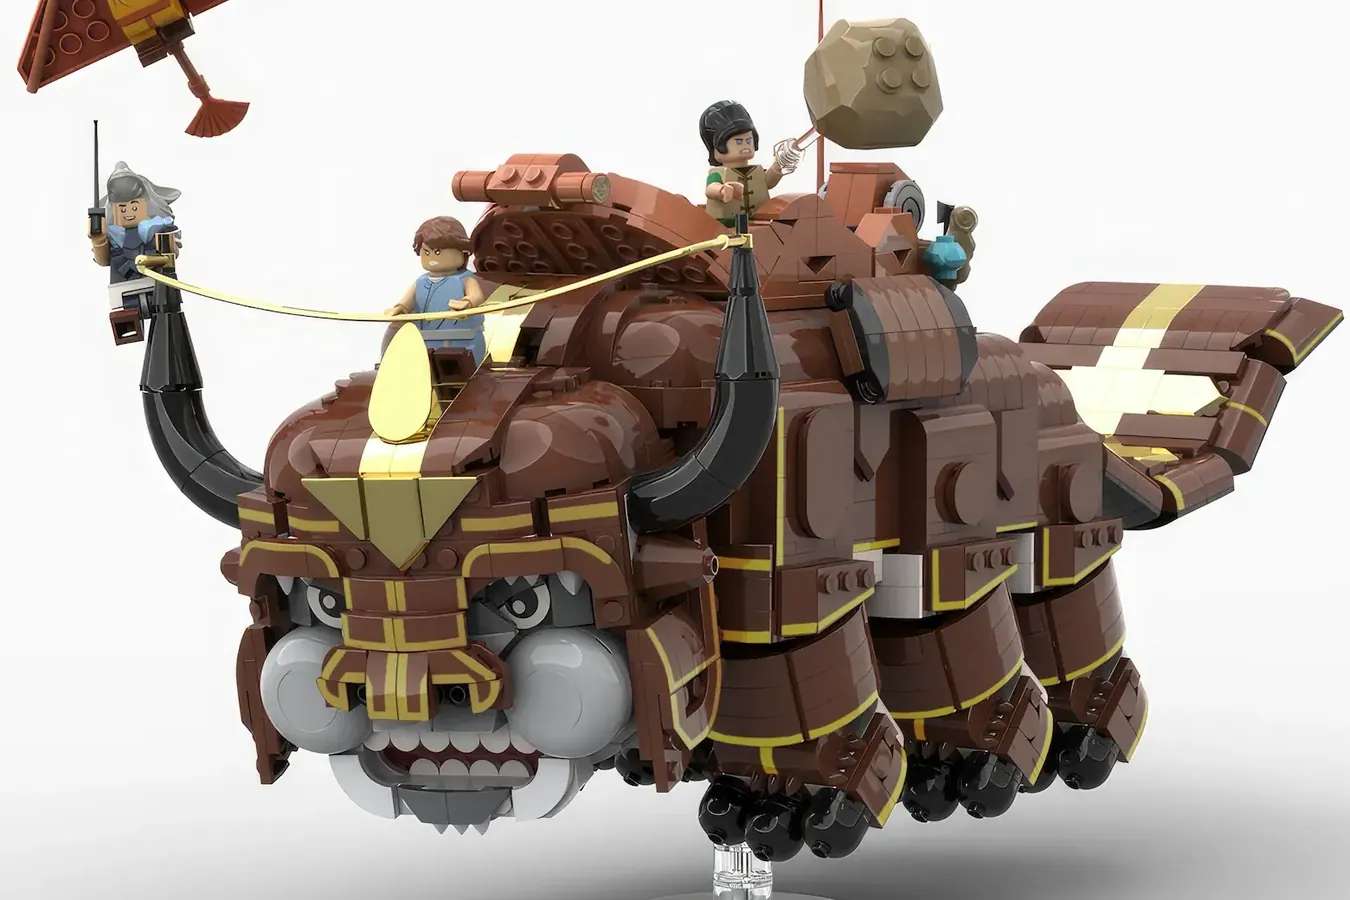 Appa from Avatar: The Last Airbender enters the LEGO Ideas Review (2024-2025 new candidate) | 2024 first round 10,000 support design introduction